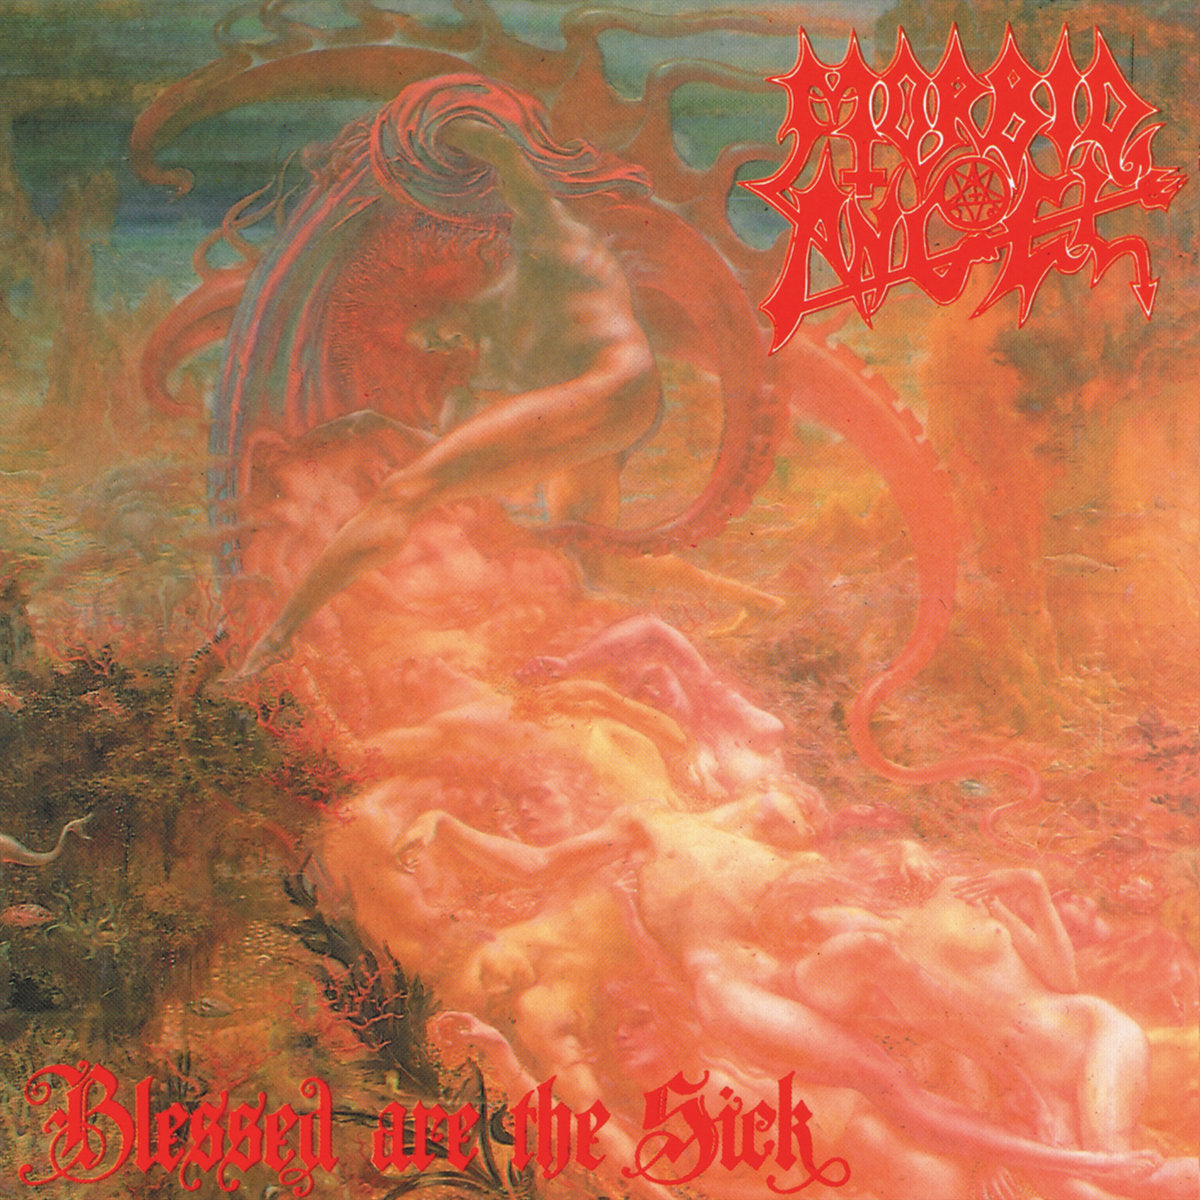 MORBID ANGEL "Blessed Are The Sick" LP